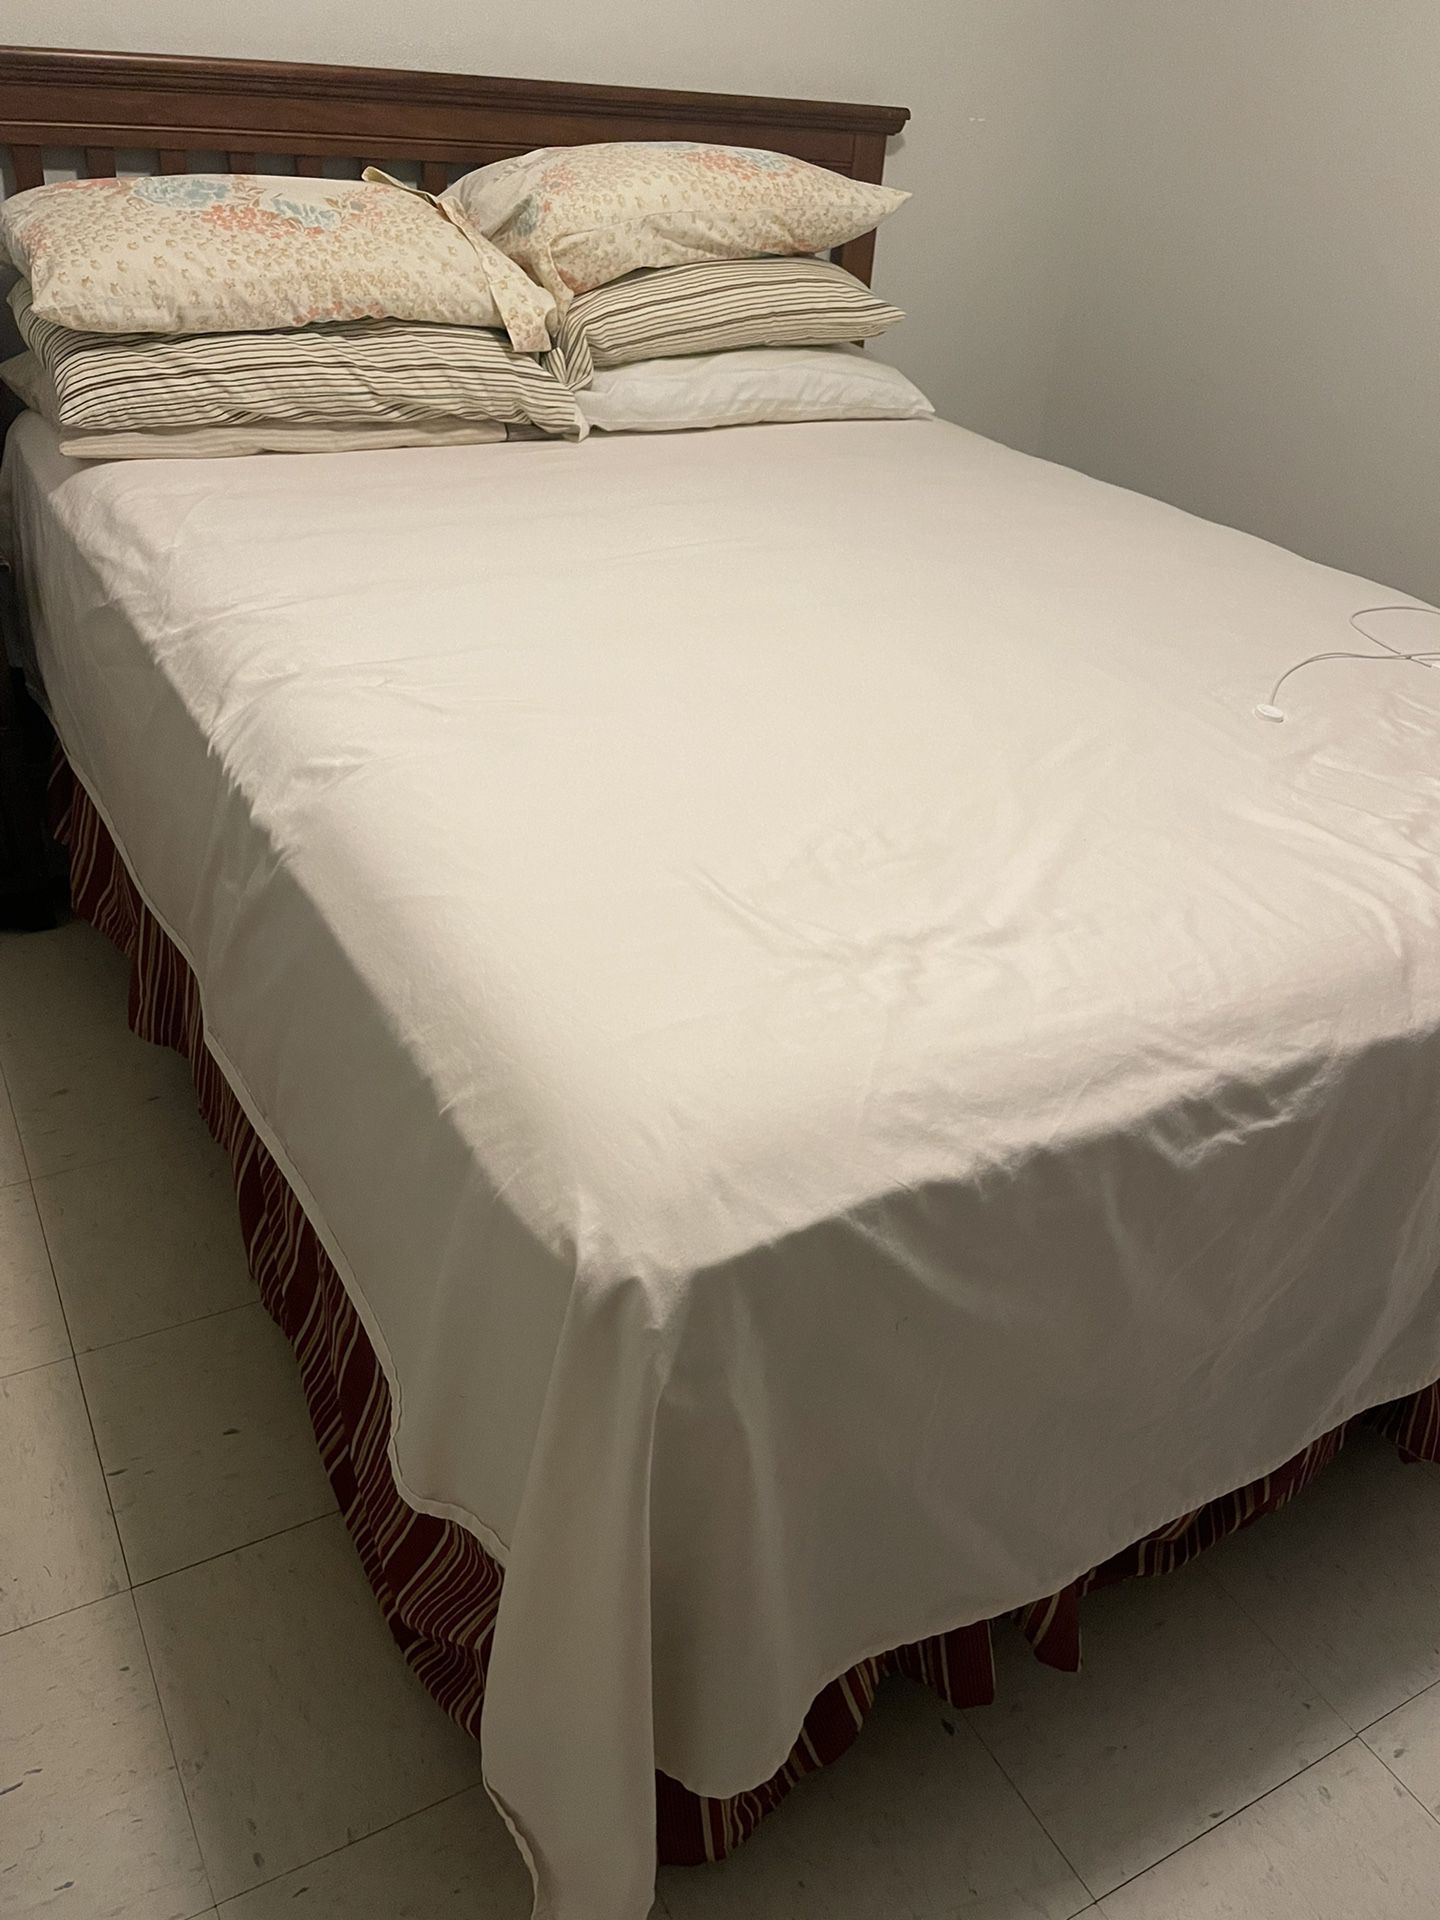 Queen Bed, Boxspring And Mattress